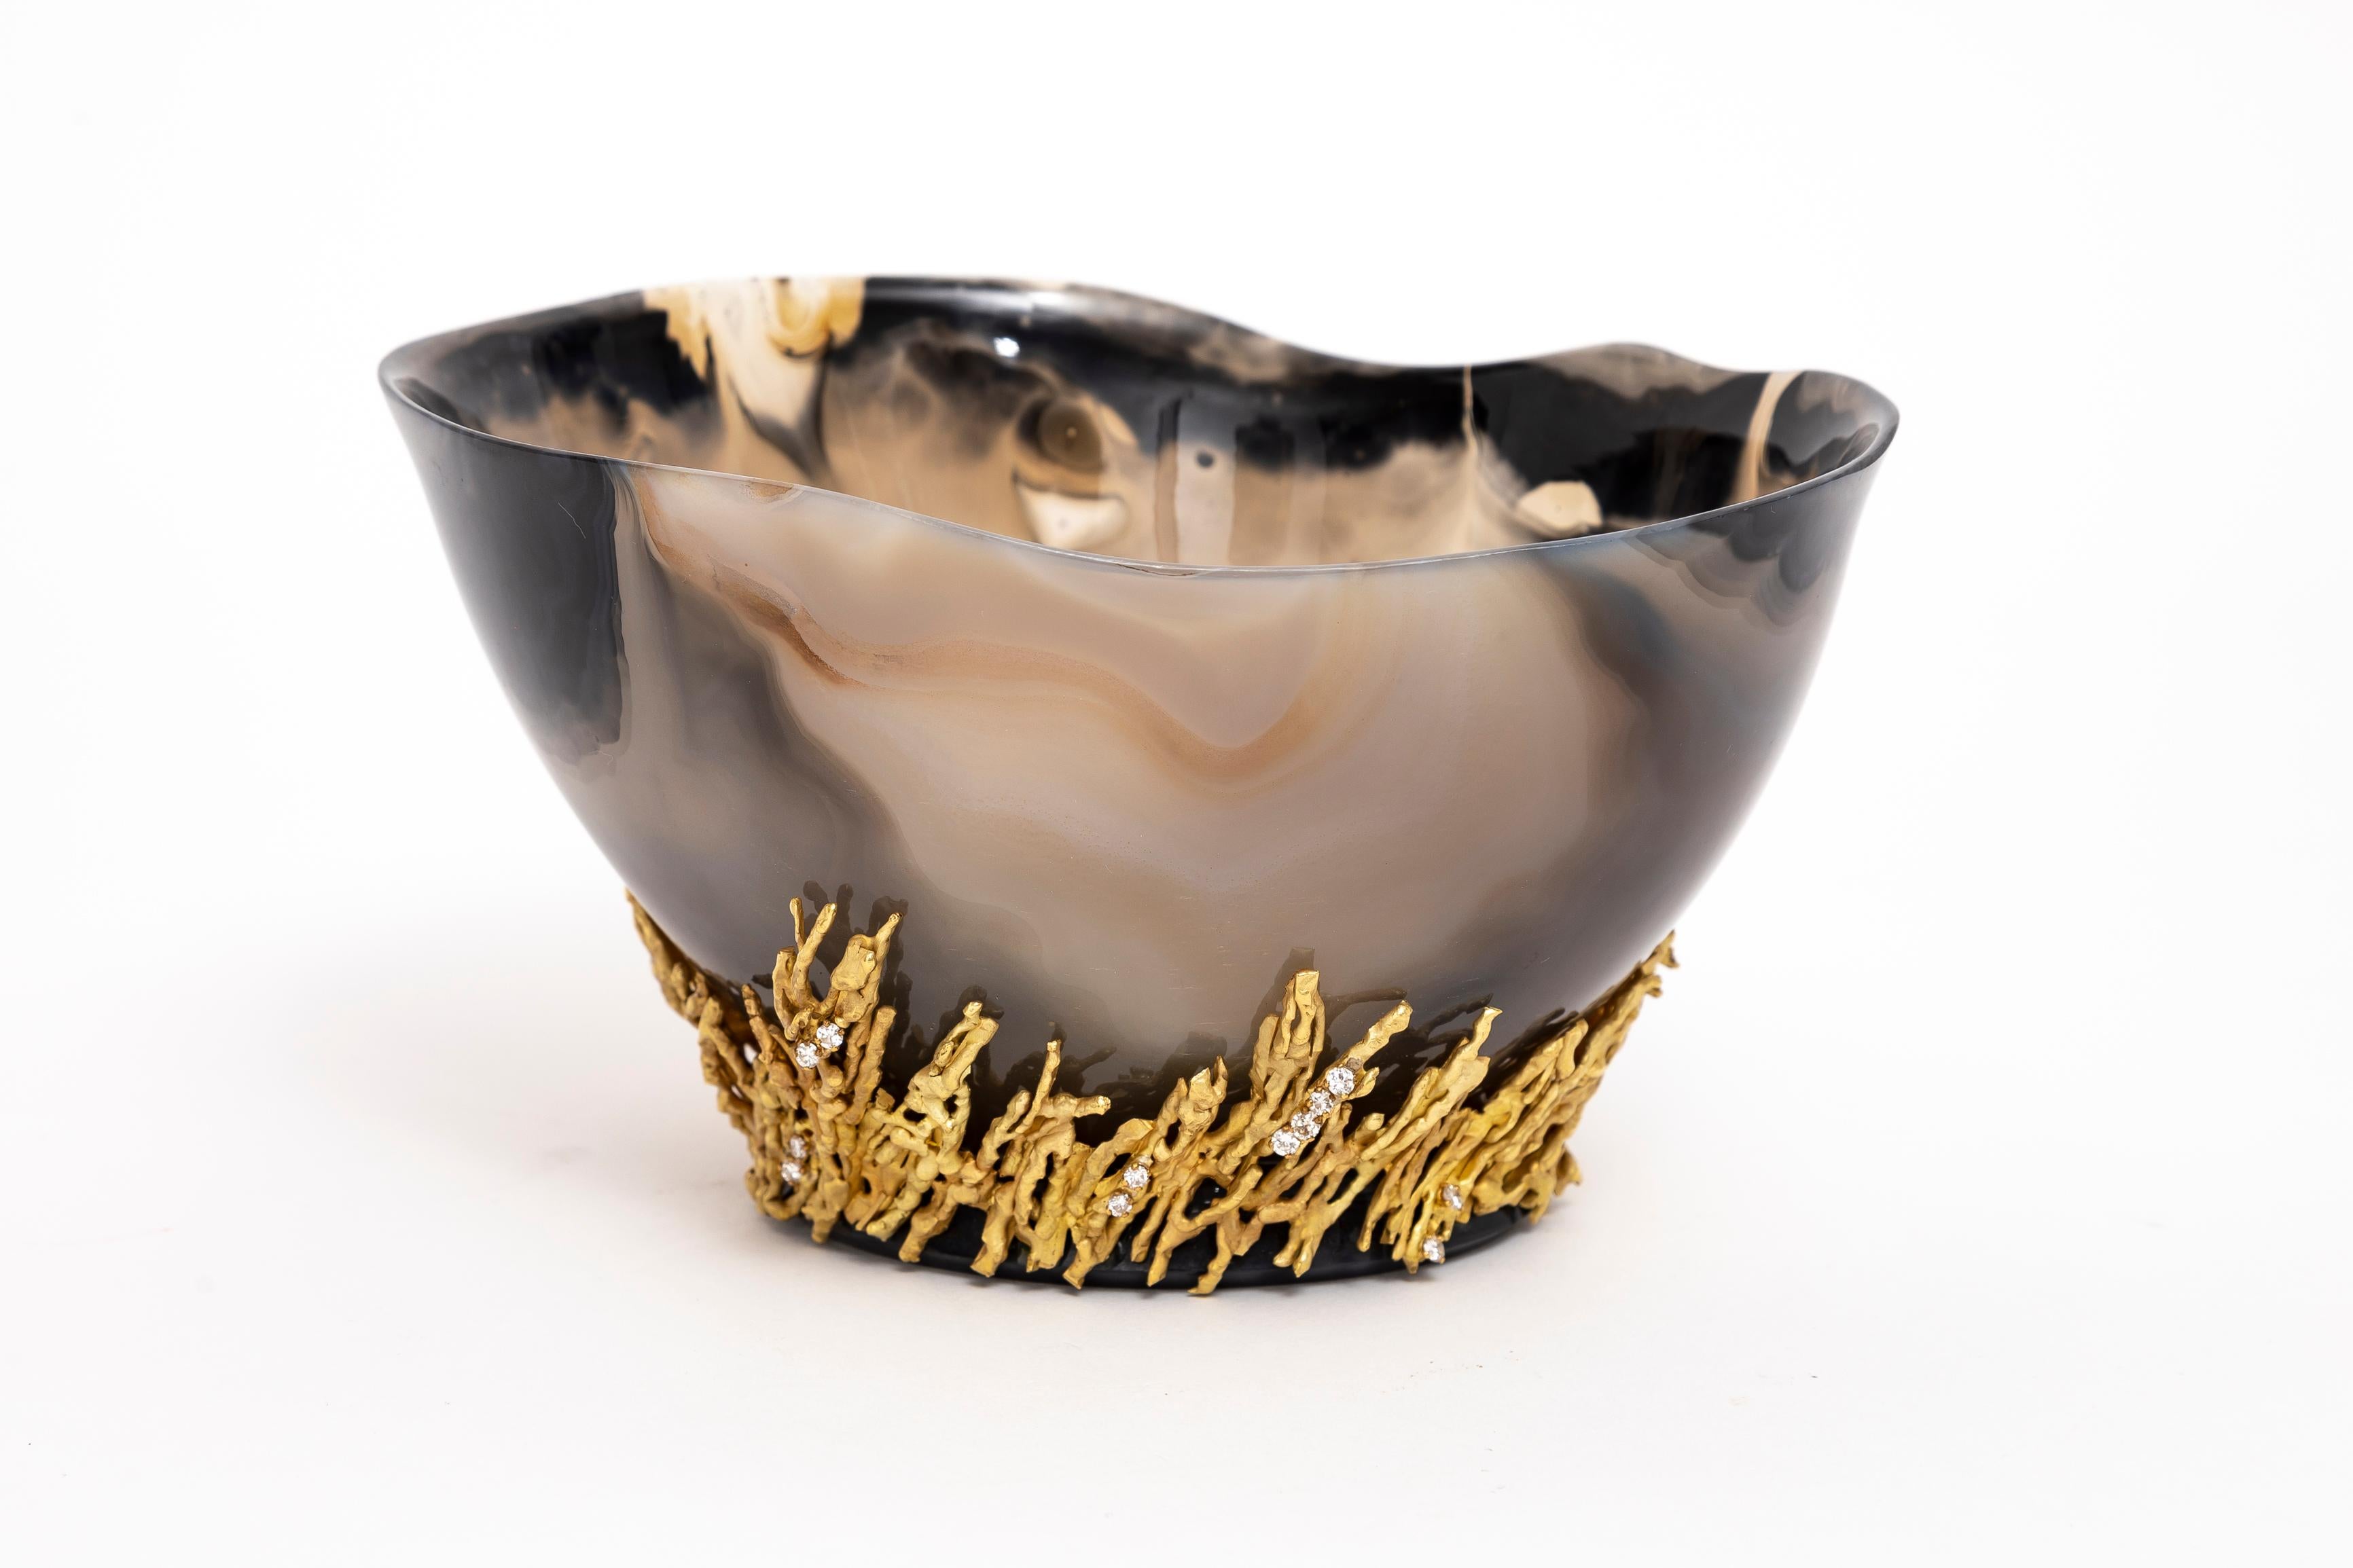 An Incredible and Rare Chaumet Paris Gold & Diamond Mounted Hand-Carved Agate Bowl, with 18K gold Stamp, as well as, Makers Stamp.  An exquisite hand-carved and hand-polished banded agate bowl perched on brutalist style 18K yellow gold nest, mounted